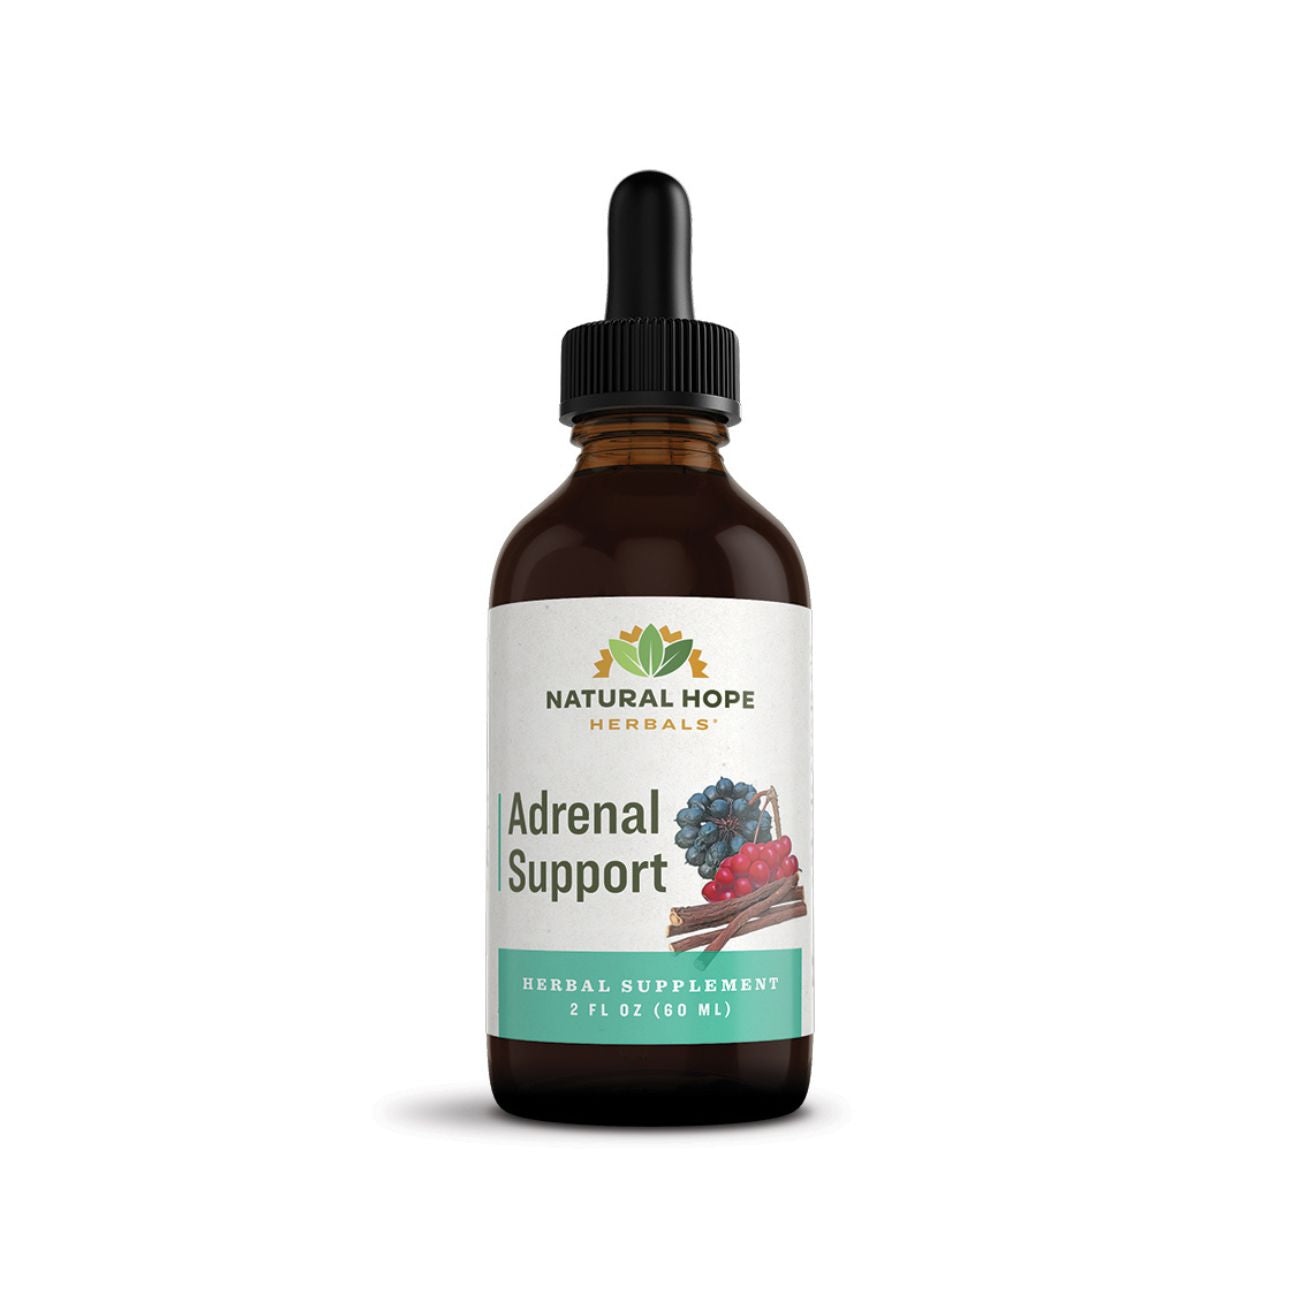 Adrenal Support - Natural Hope Herbals